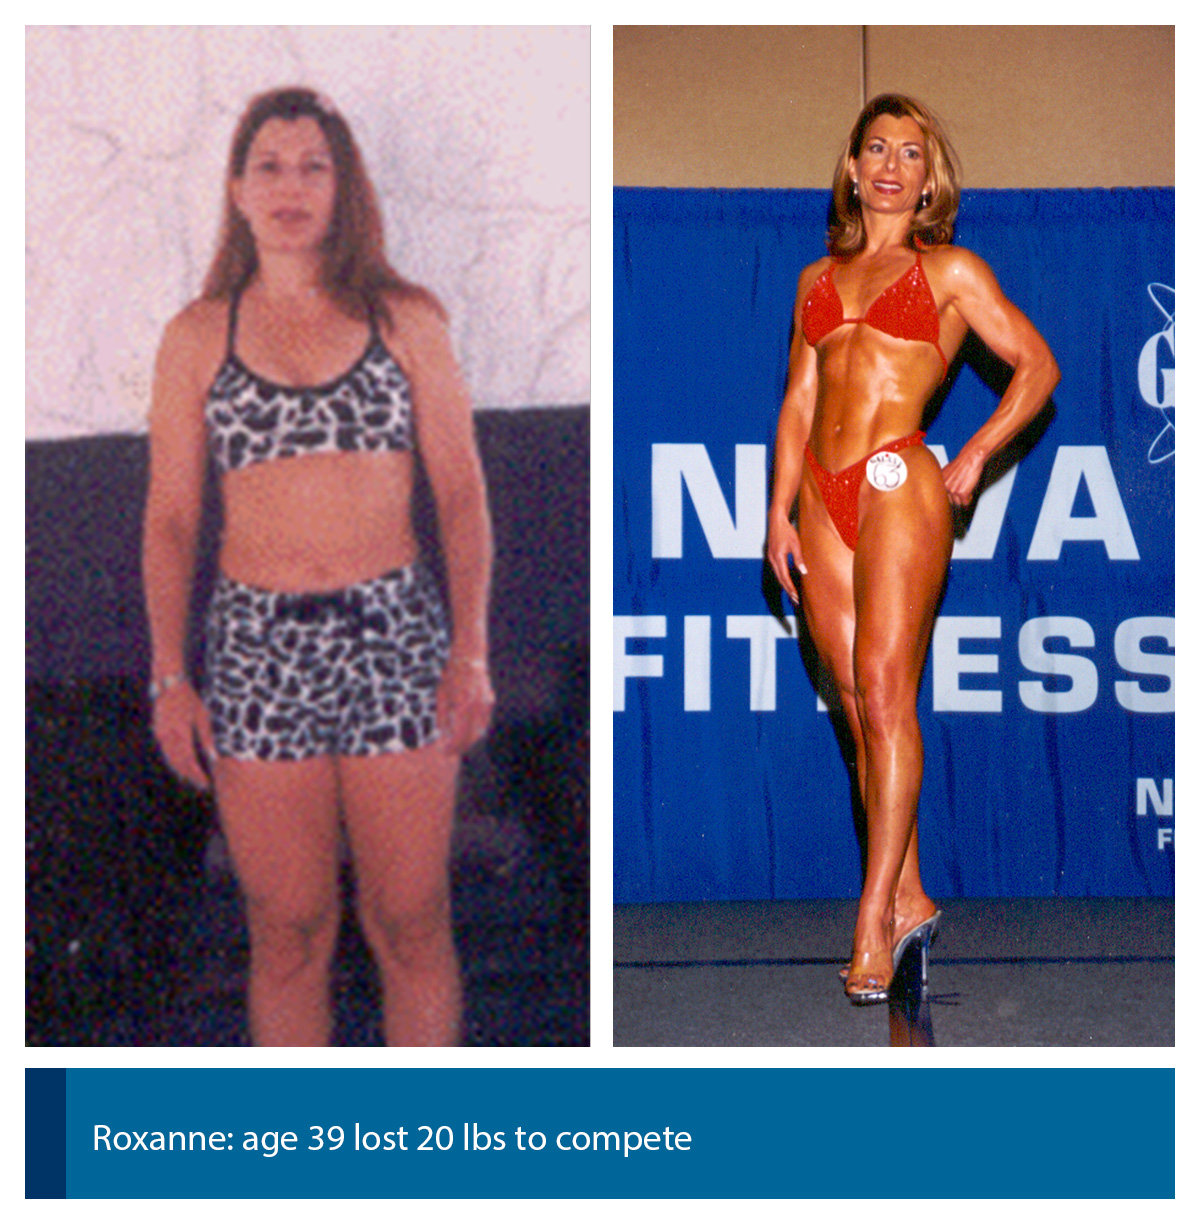 bikini competitor before and after